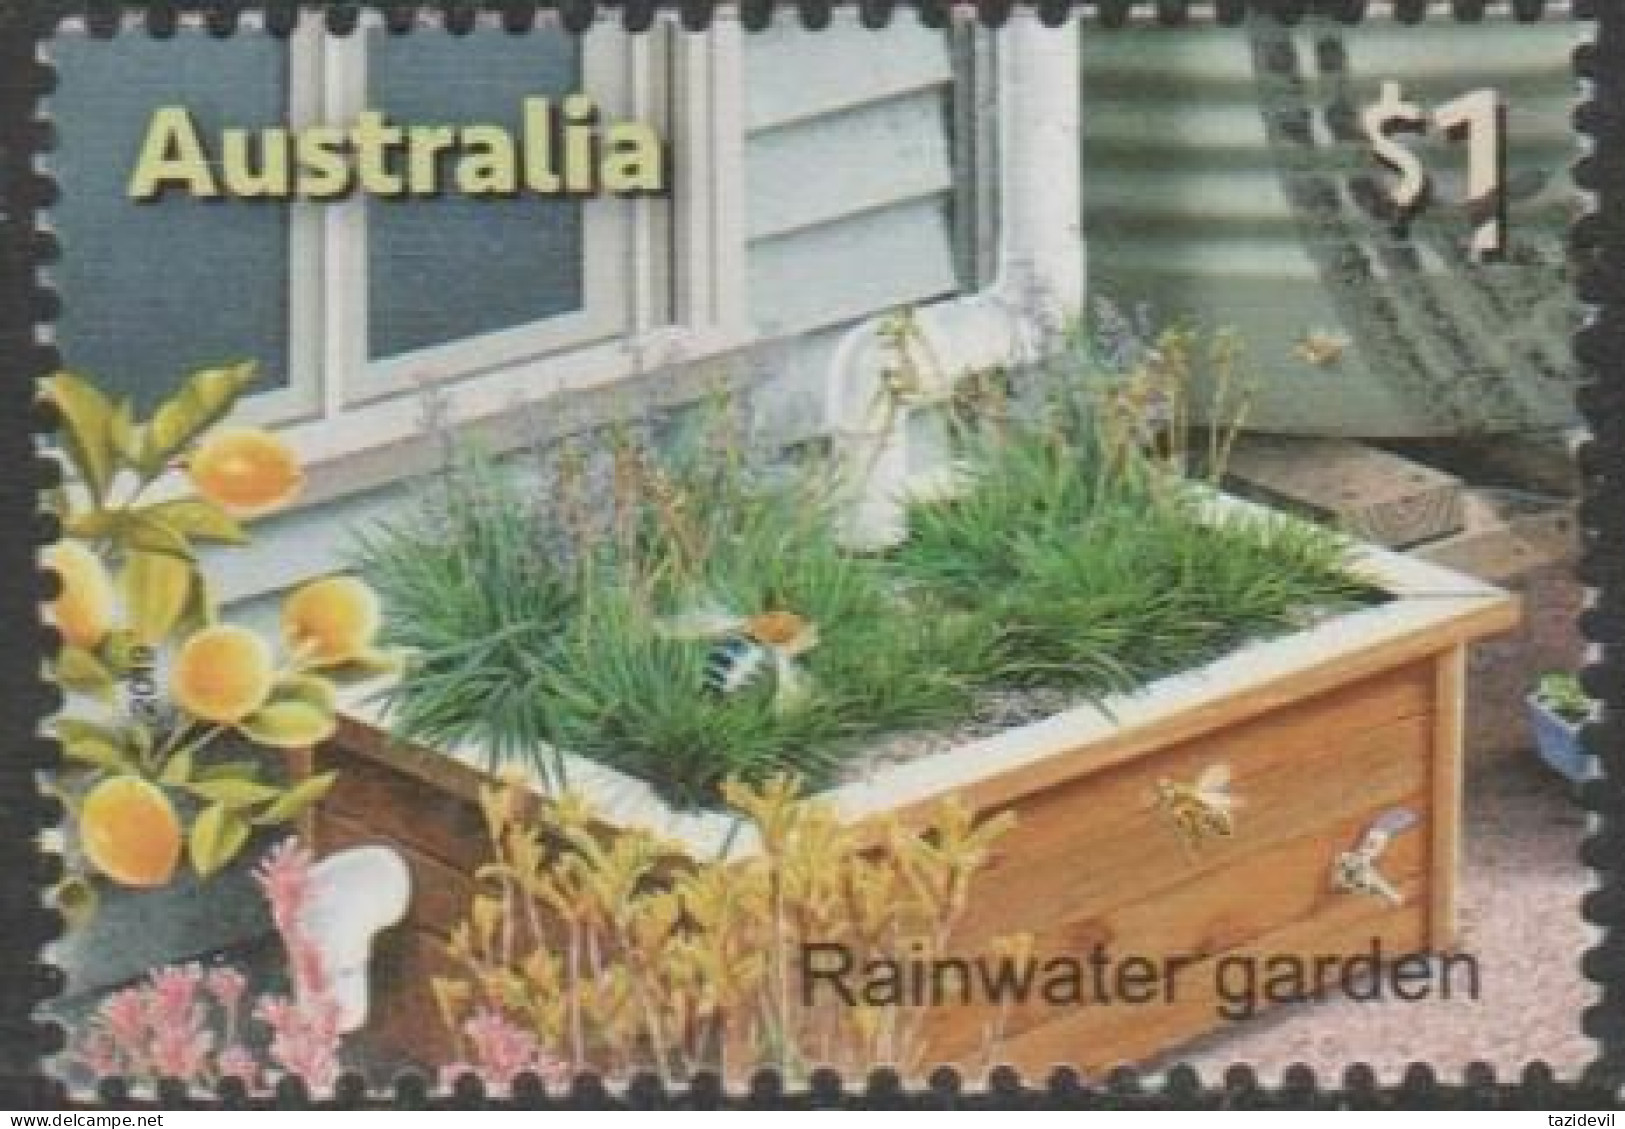 AUSTRALIA - USED 2019 $1.00 Stamp Collecting Month - In The Garden - Rainwater Garden - Used Stamps